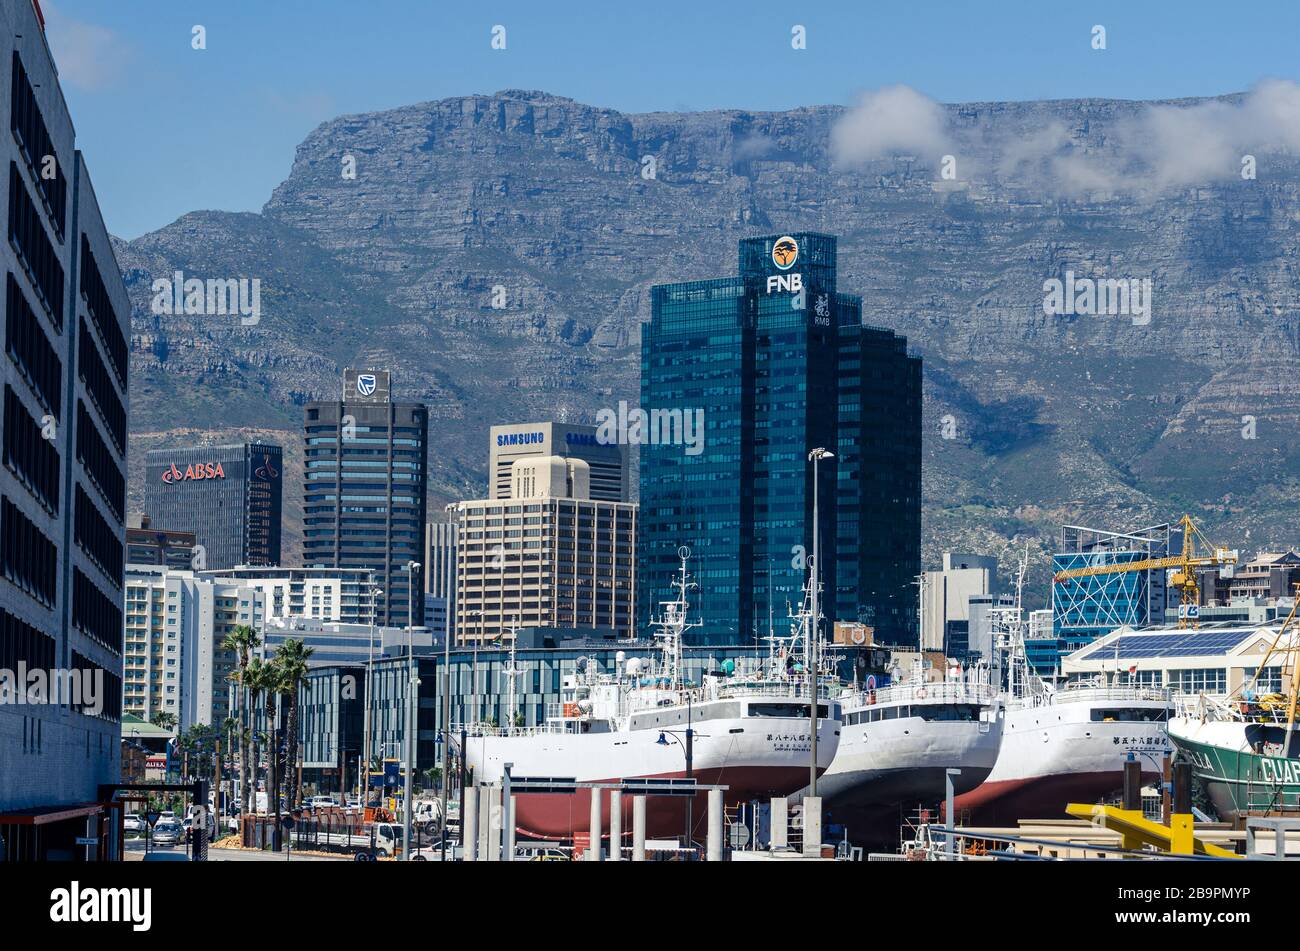 3 large Asian ships in dry dock in Alfred basin repair dock yard Silo district with city and Table mountain backdrop port of Cape Town South Africa Stock Photo